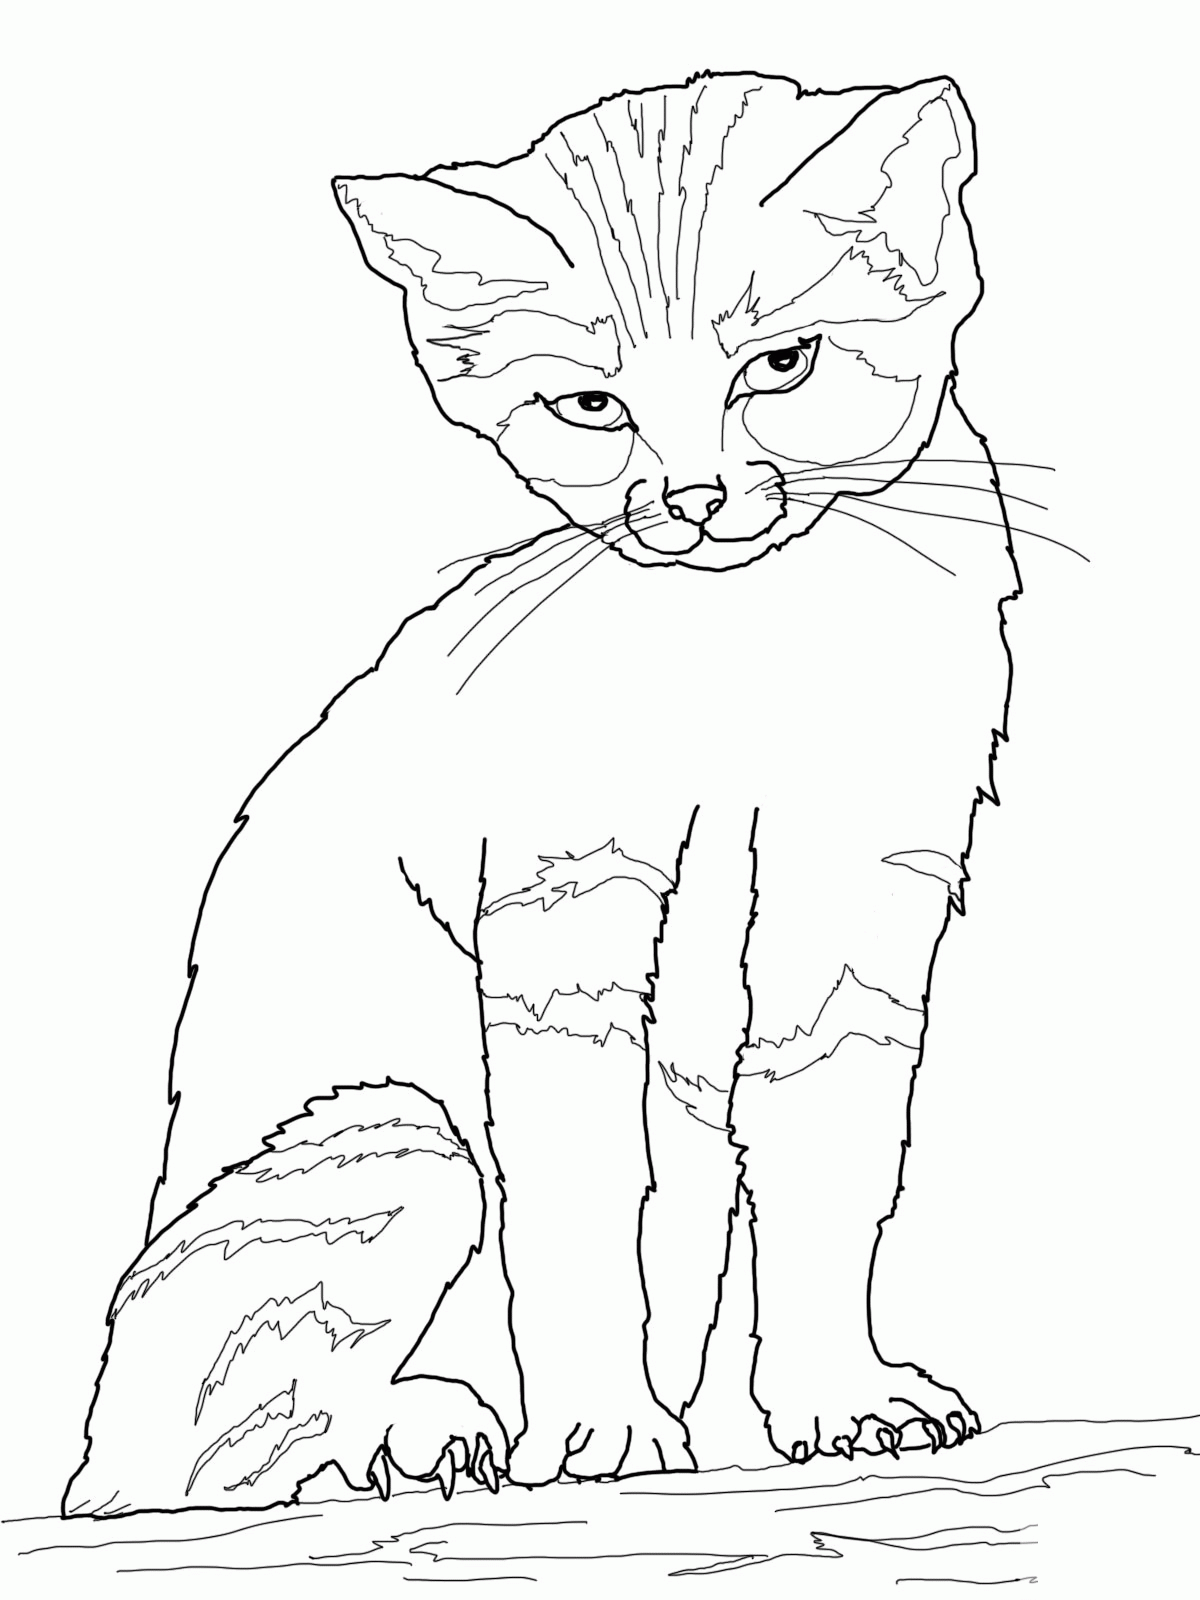 Free Coloring Pages Dog And Kat - Coloring Home